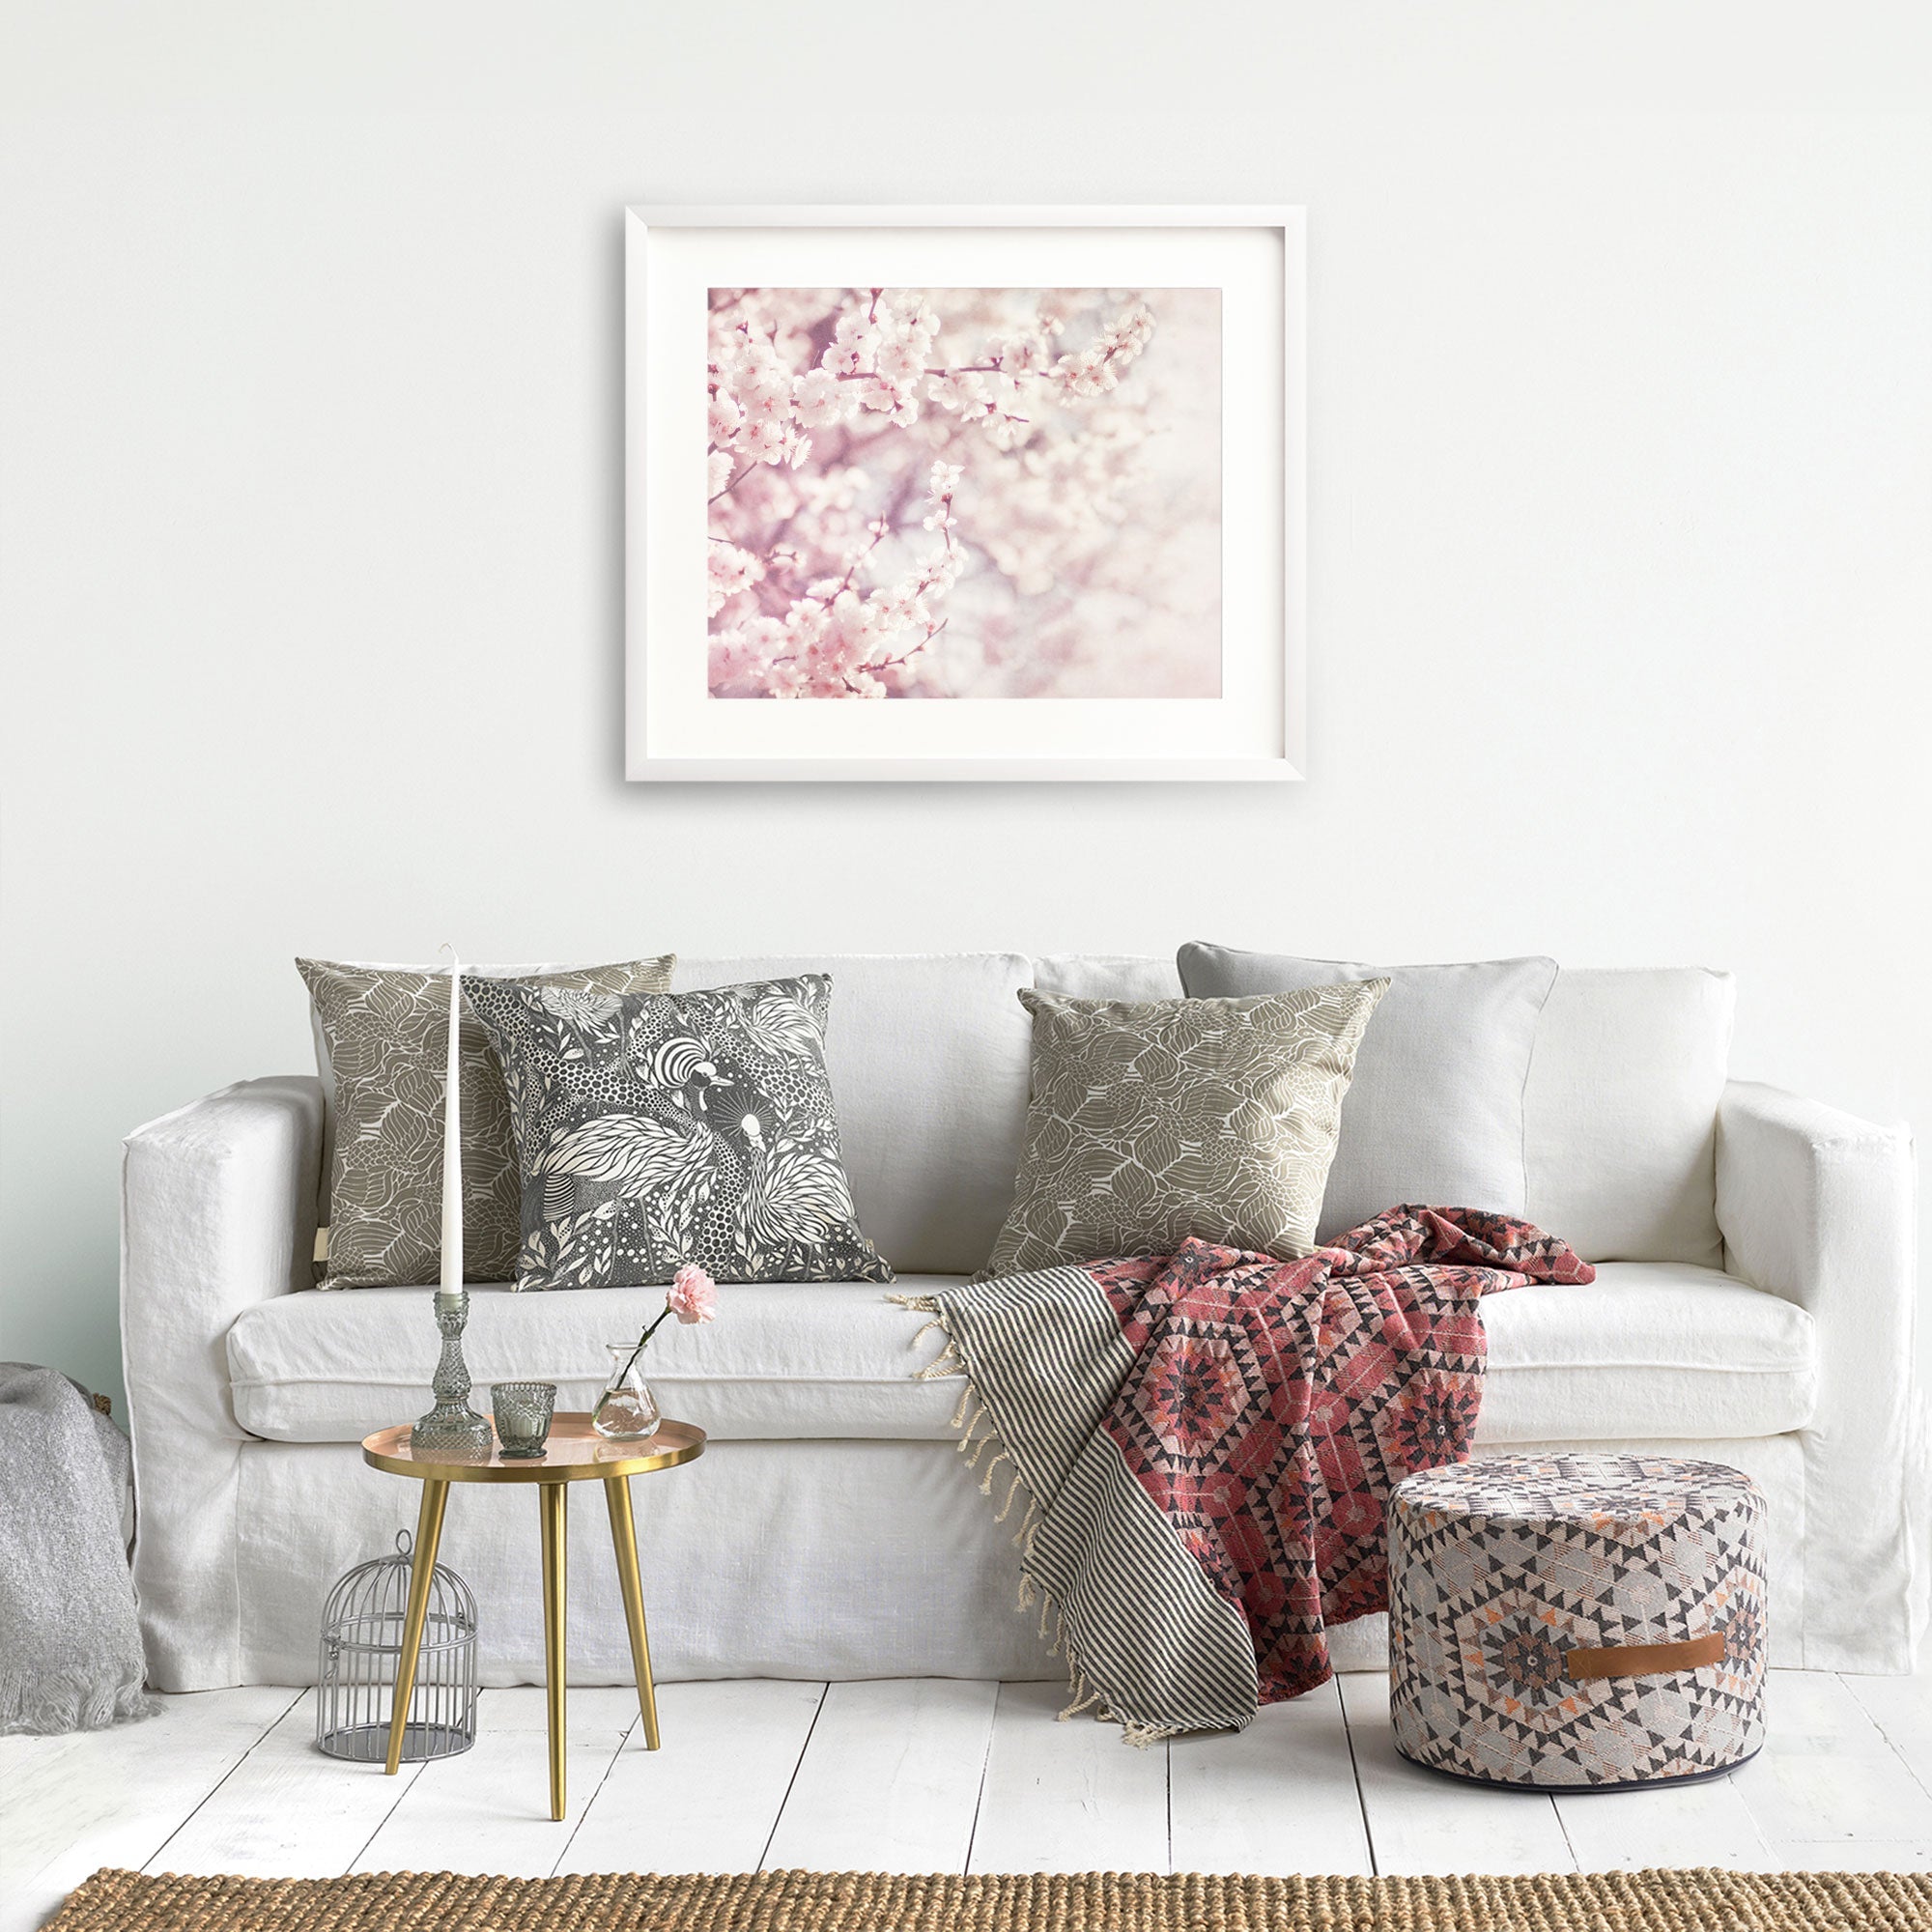 A cozy living room corner with a white sofa adorned with patterned cushions, a pink and gray throw blanket, a small round glass table, a decorative birdcage, and the Offley Green Pink Floral Print, 'Dreamy Blossom.'